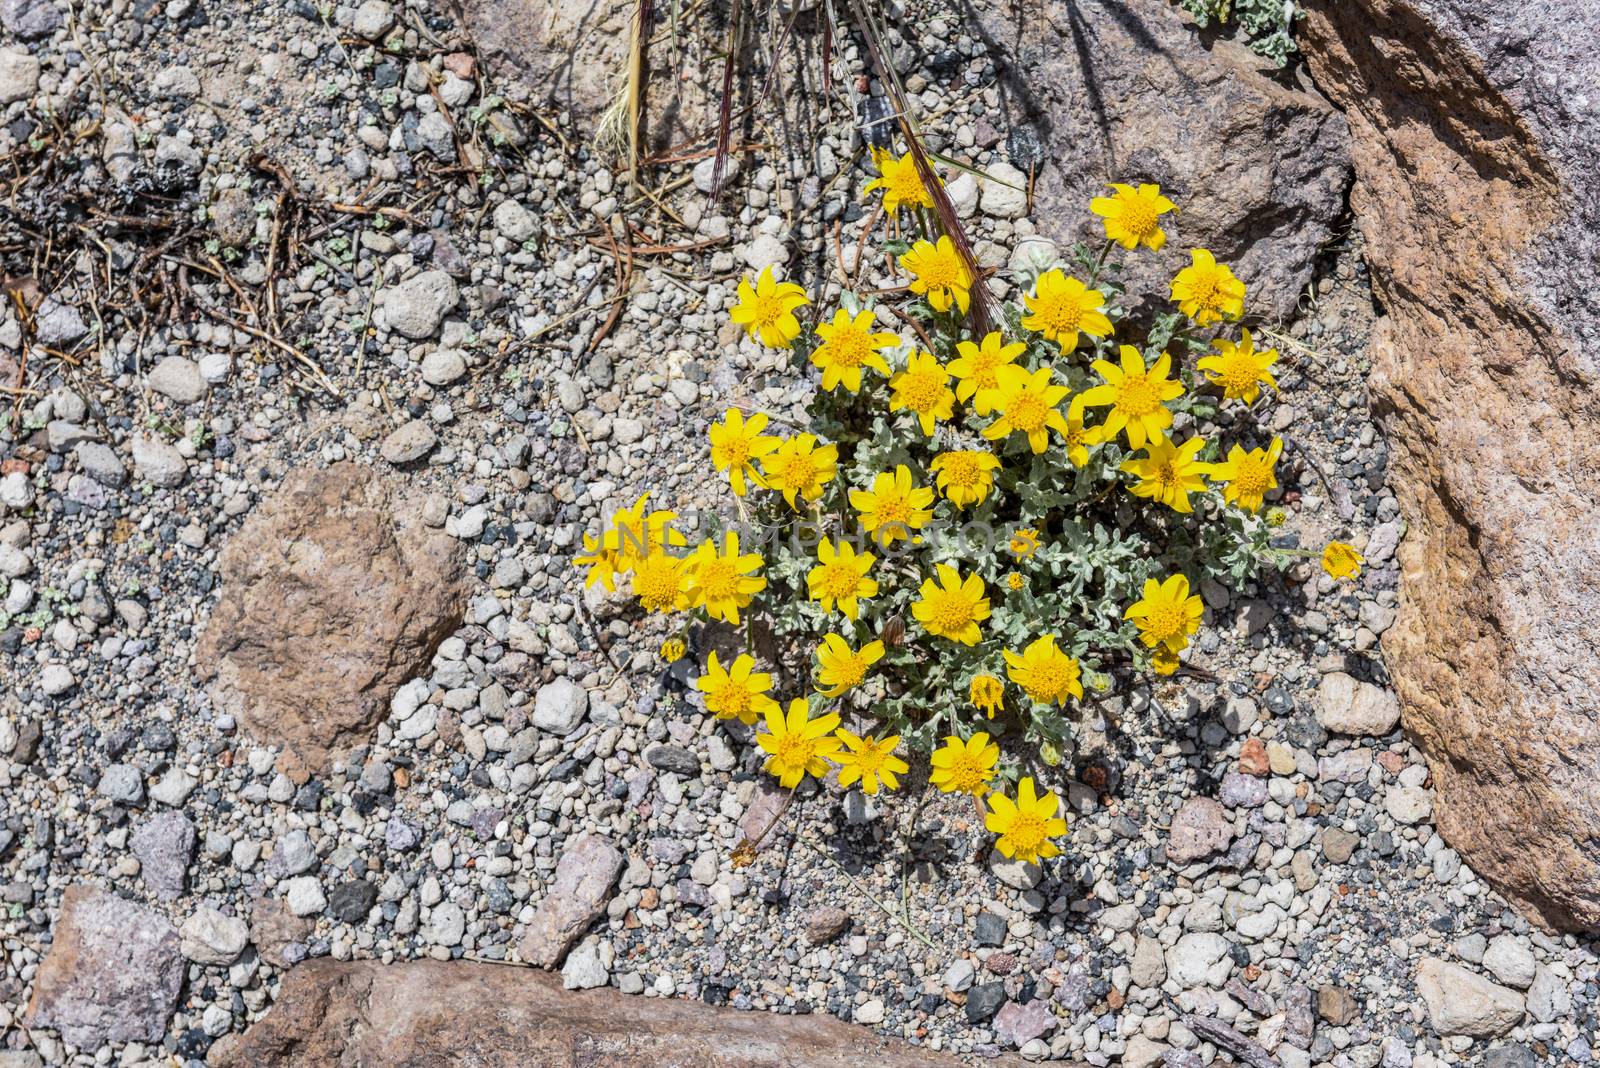 Yellow flowers , ground-clinging vegetaion, in the alipine zone on Mammoth Mountain, California by Njean